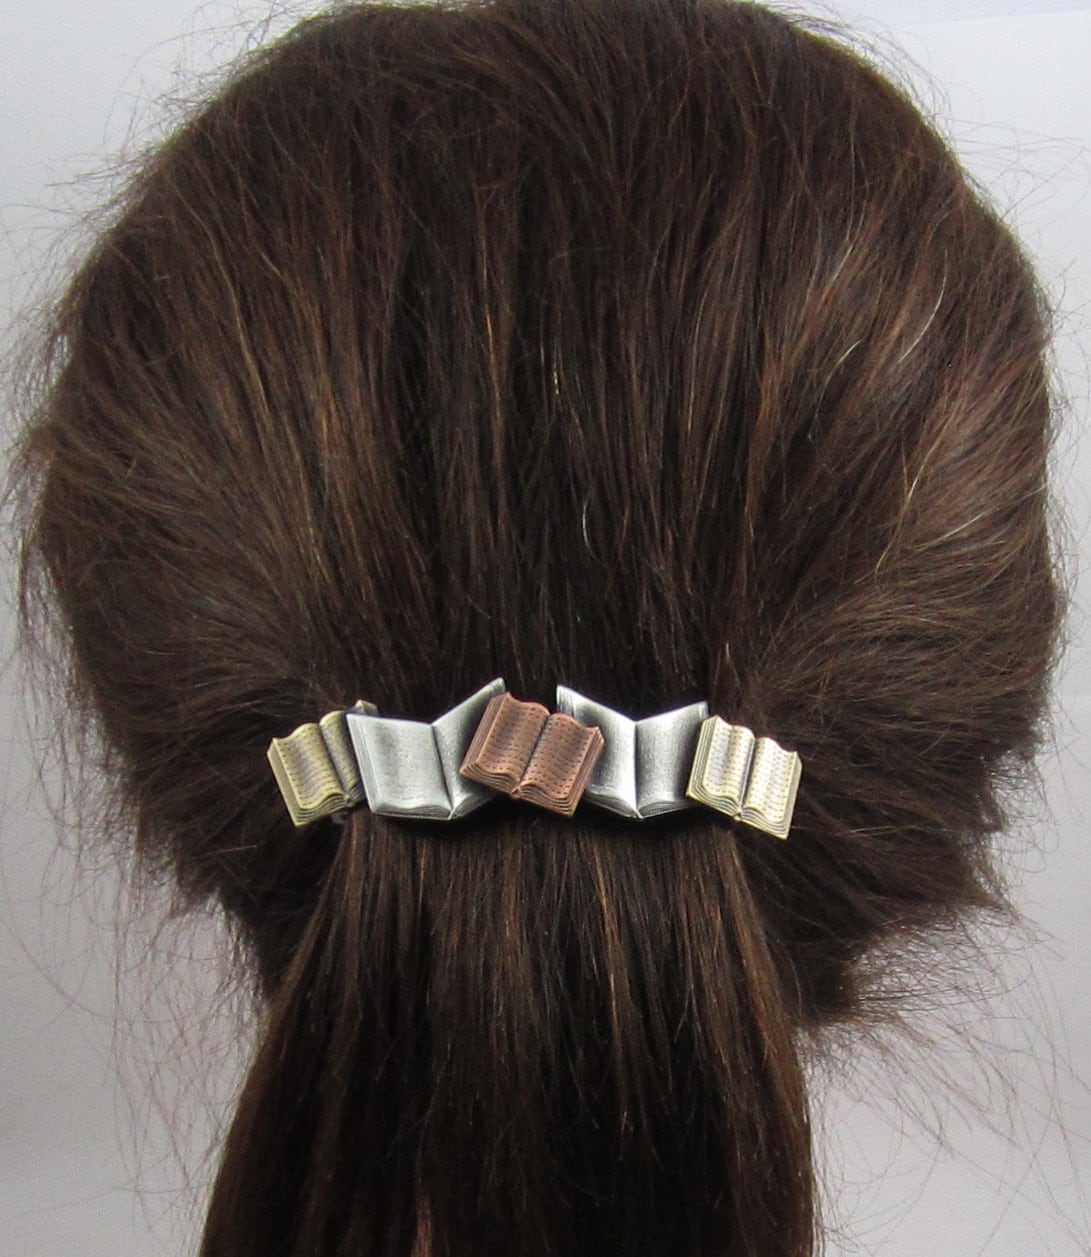 18 Hair Barrettes Ideas to Wear with Any Hairstyles  LoveHairStylescom